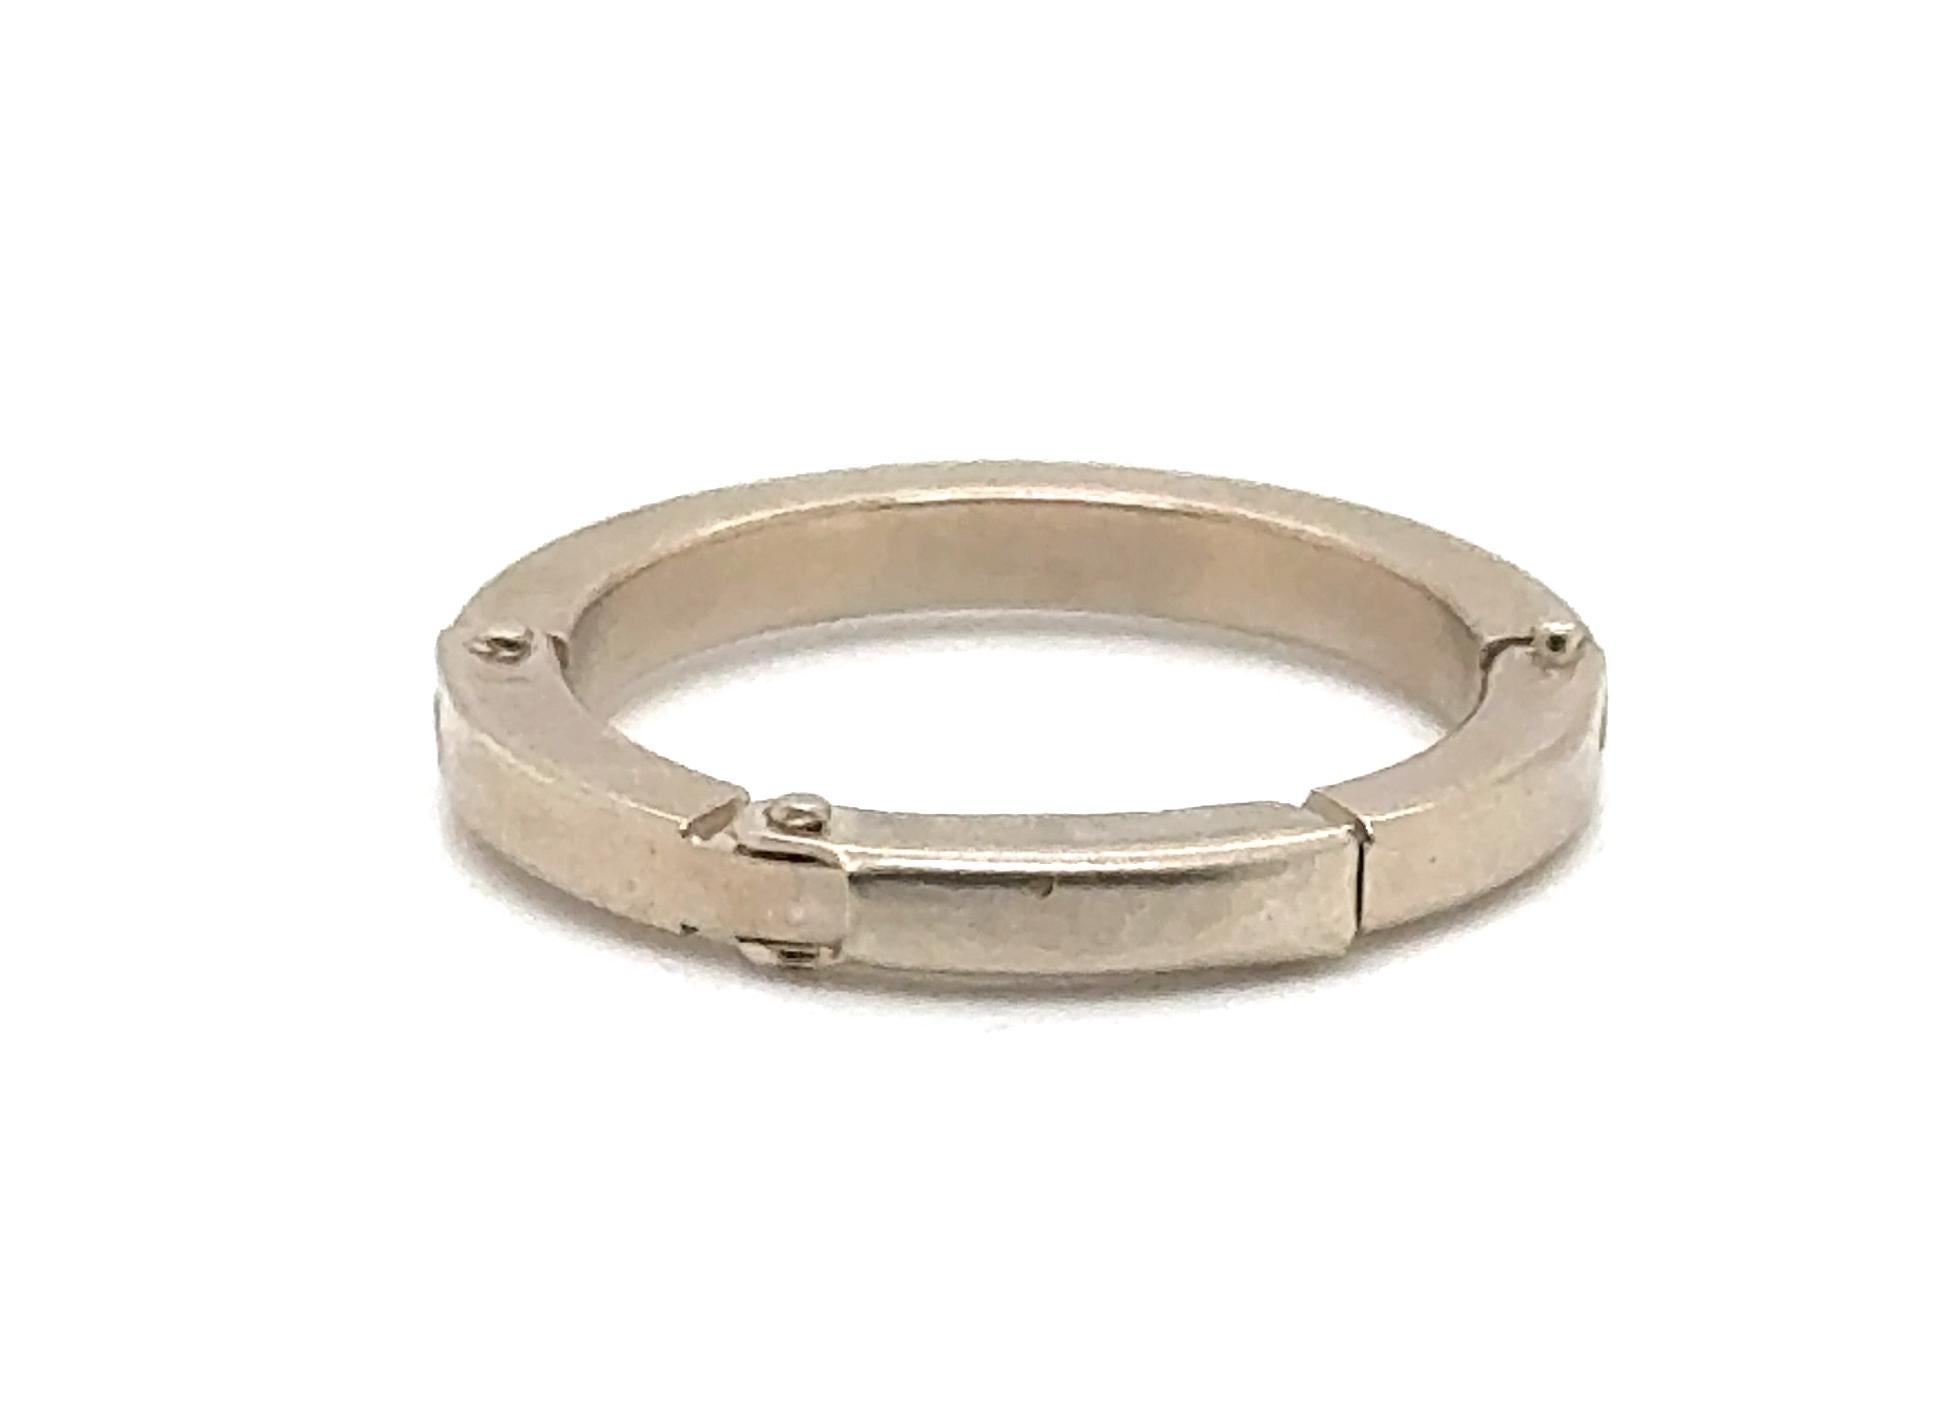 Arthritic Shank Wedding Band Anniversary Ring 14K White Gold 


Brand New Arthritic Shank Ring

Currently Just 14K Gold But We Can Mount Diamonds

About $150 in Gold Value Alone

Has a Hinge to Open and Close Around Arthritic Fingers

14K White